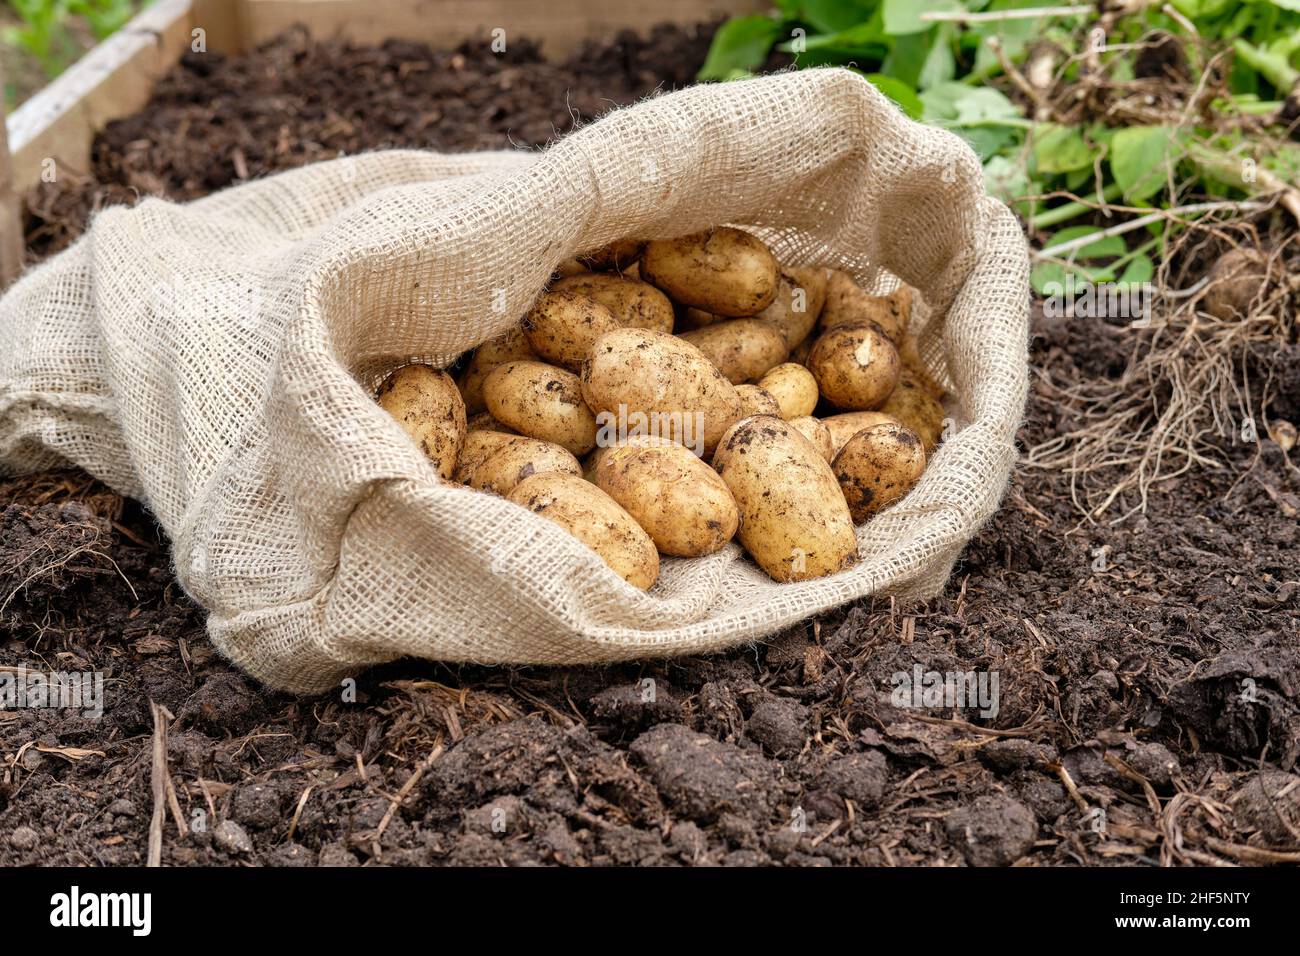 A hessian potato sack filled with freshly lifted Charlotte New Potatoes from a rich organic matter filled soil in a vegetable garden raised bed. Stock Photo